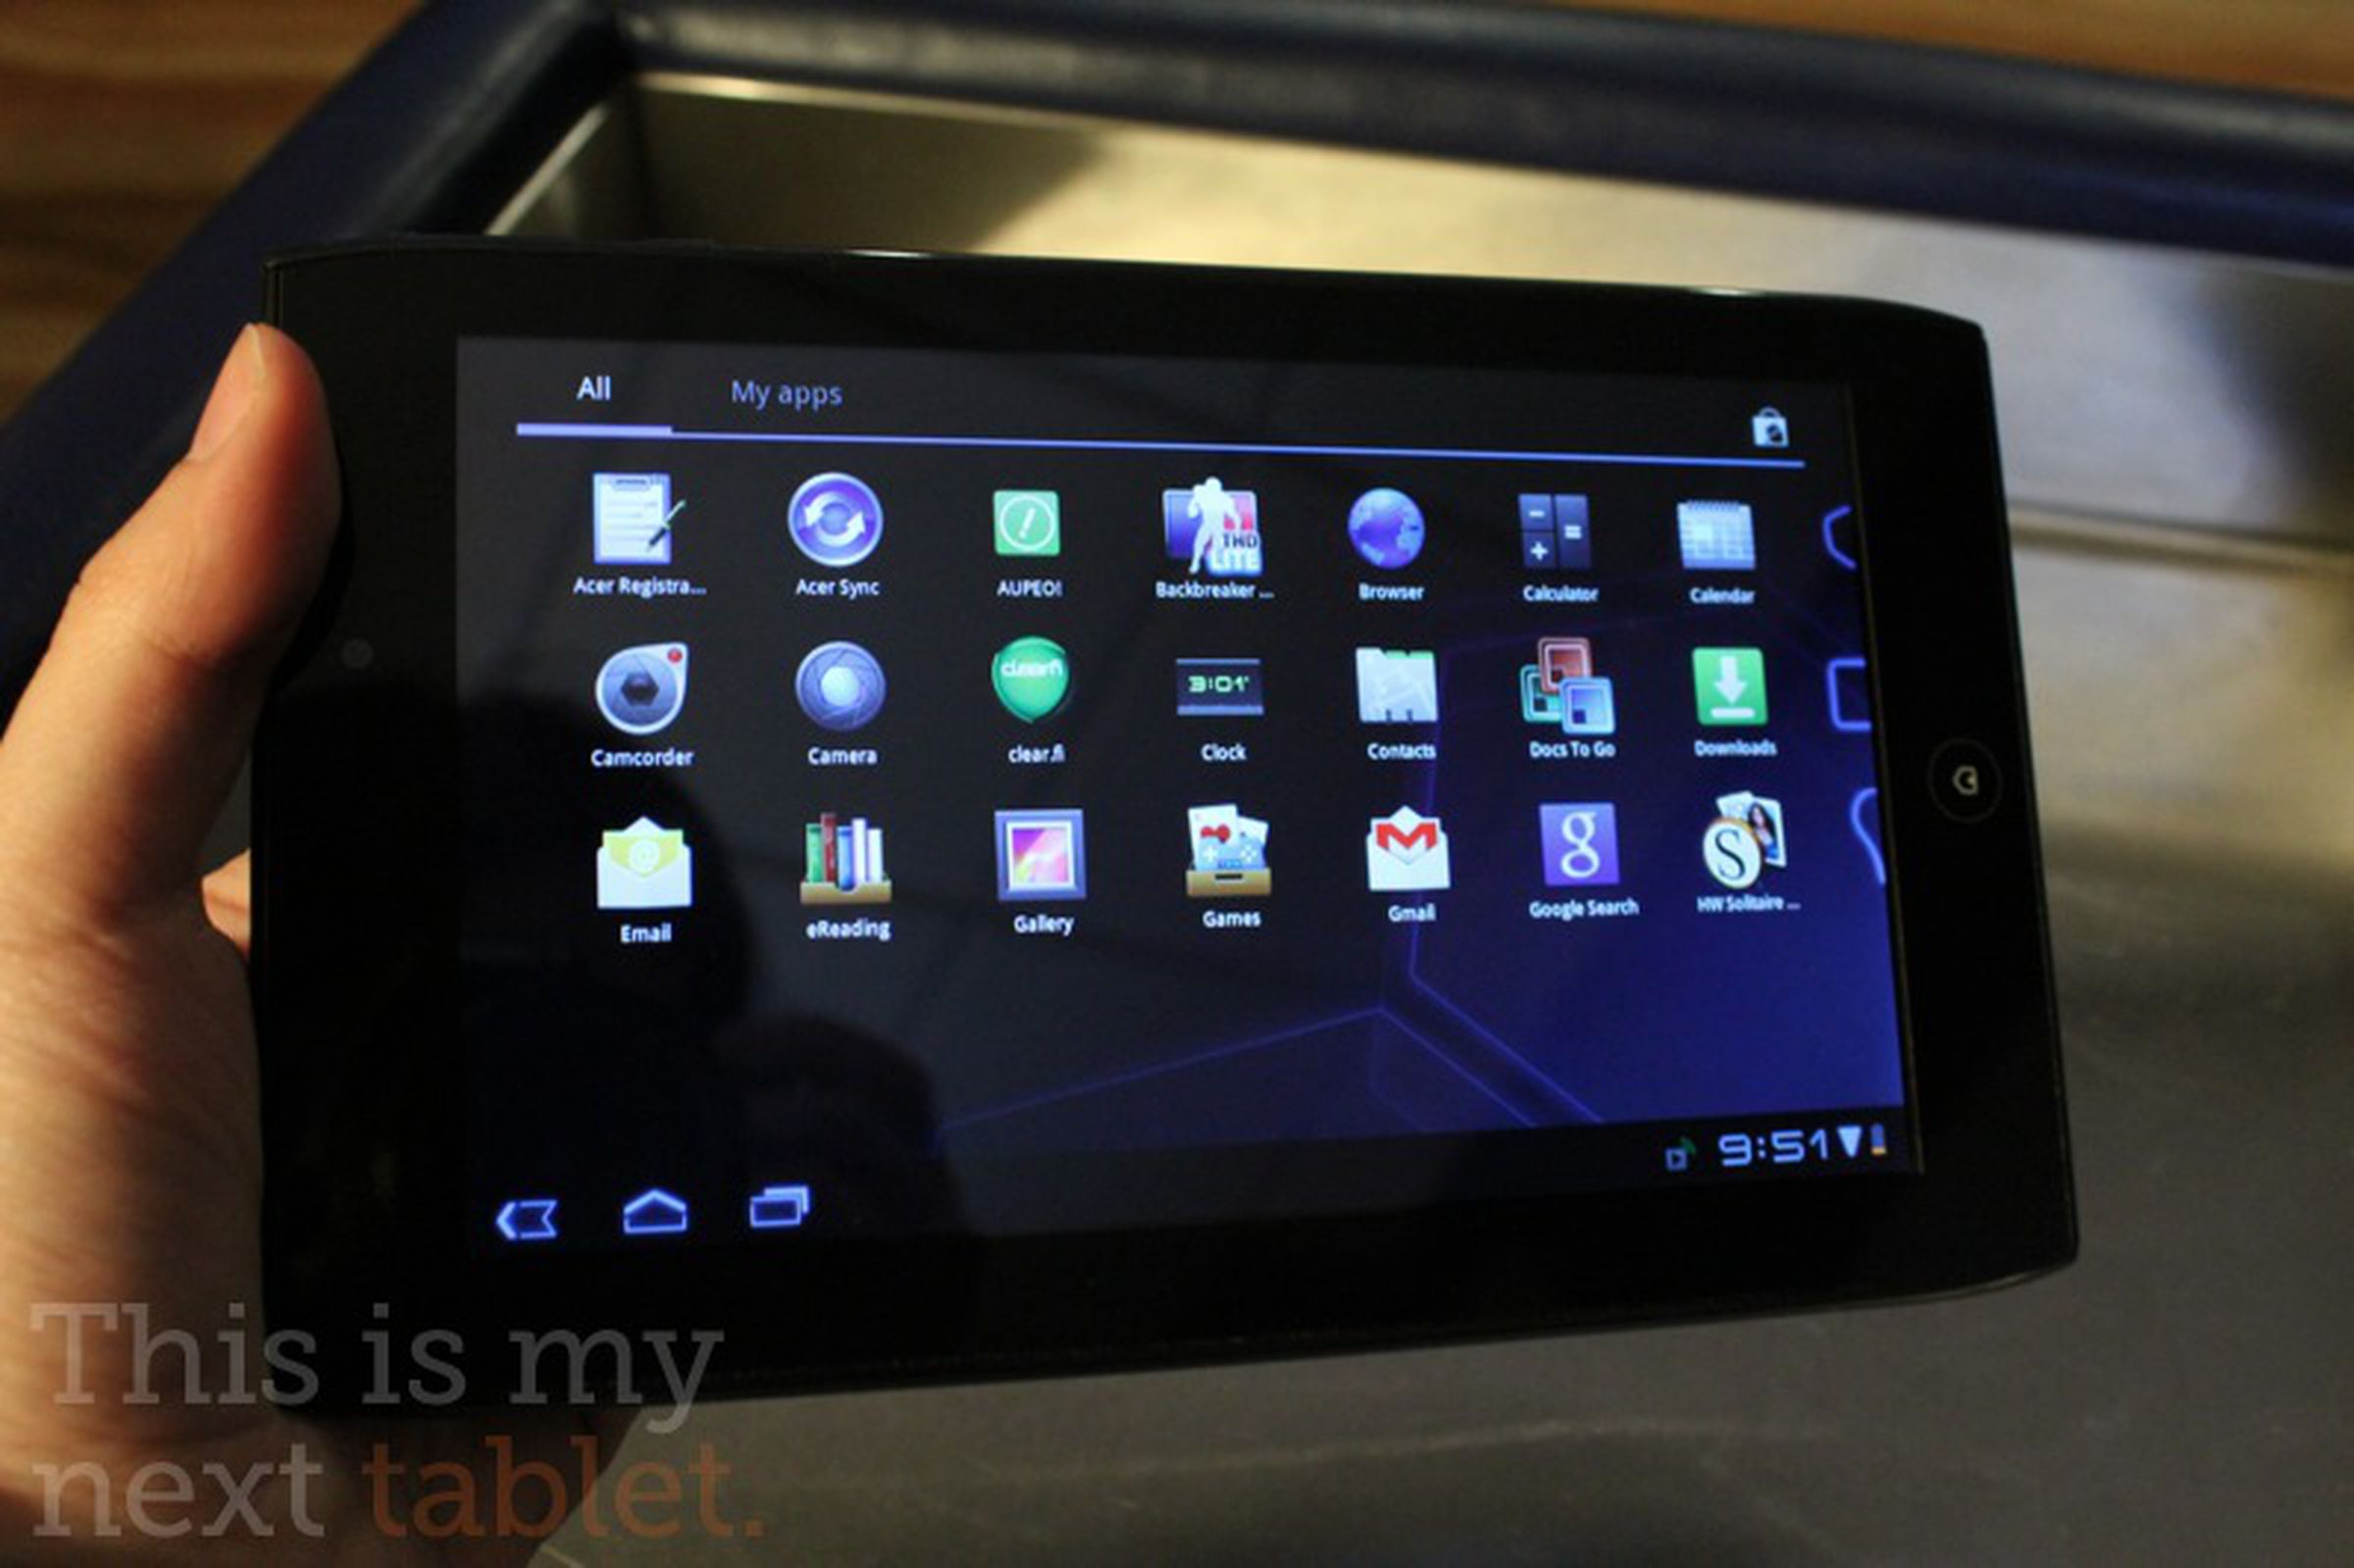 Acer Iconia Tab A100 hands-on photos